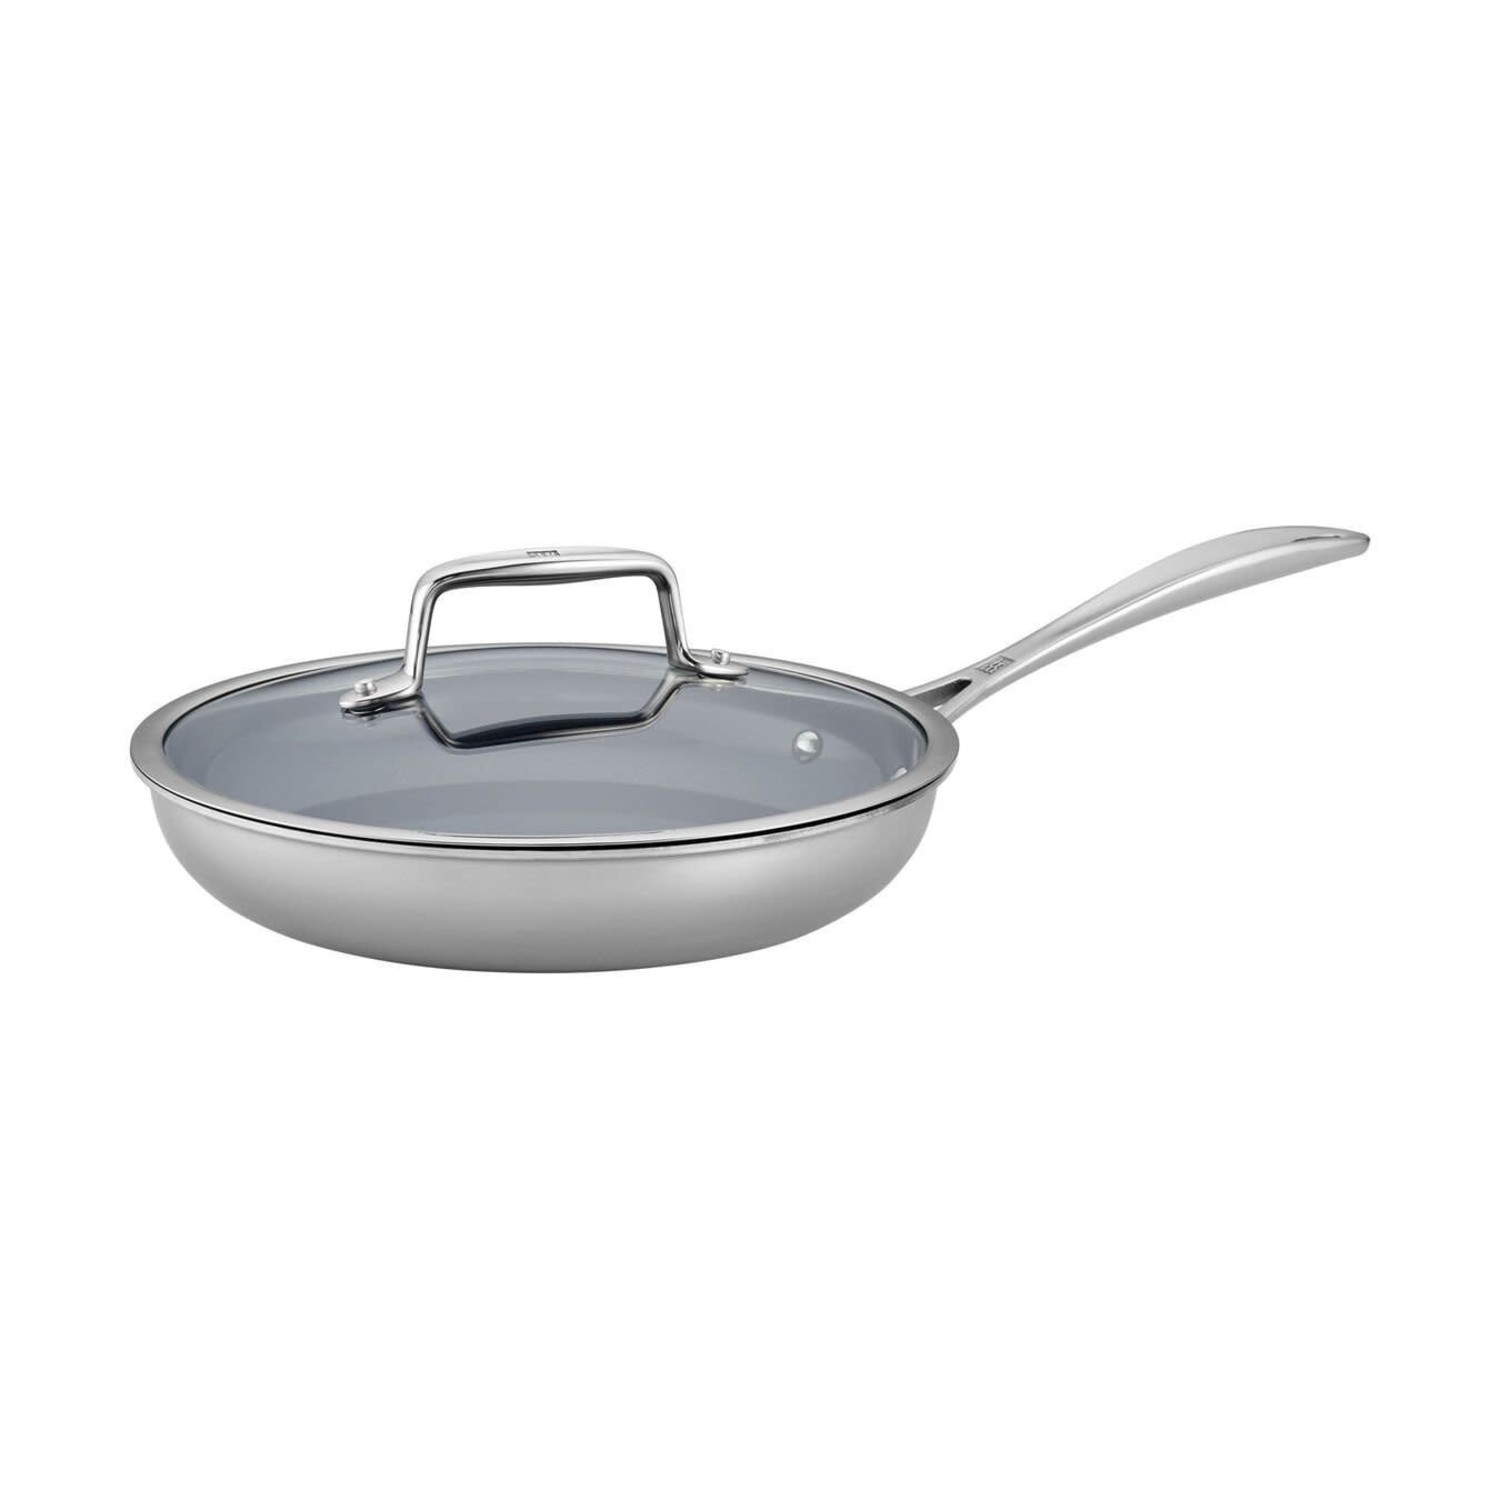 ZWILLING J.A. Henckels 10 Clad Xtreme Ceramic Frying Pan + Reviews